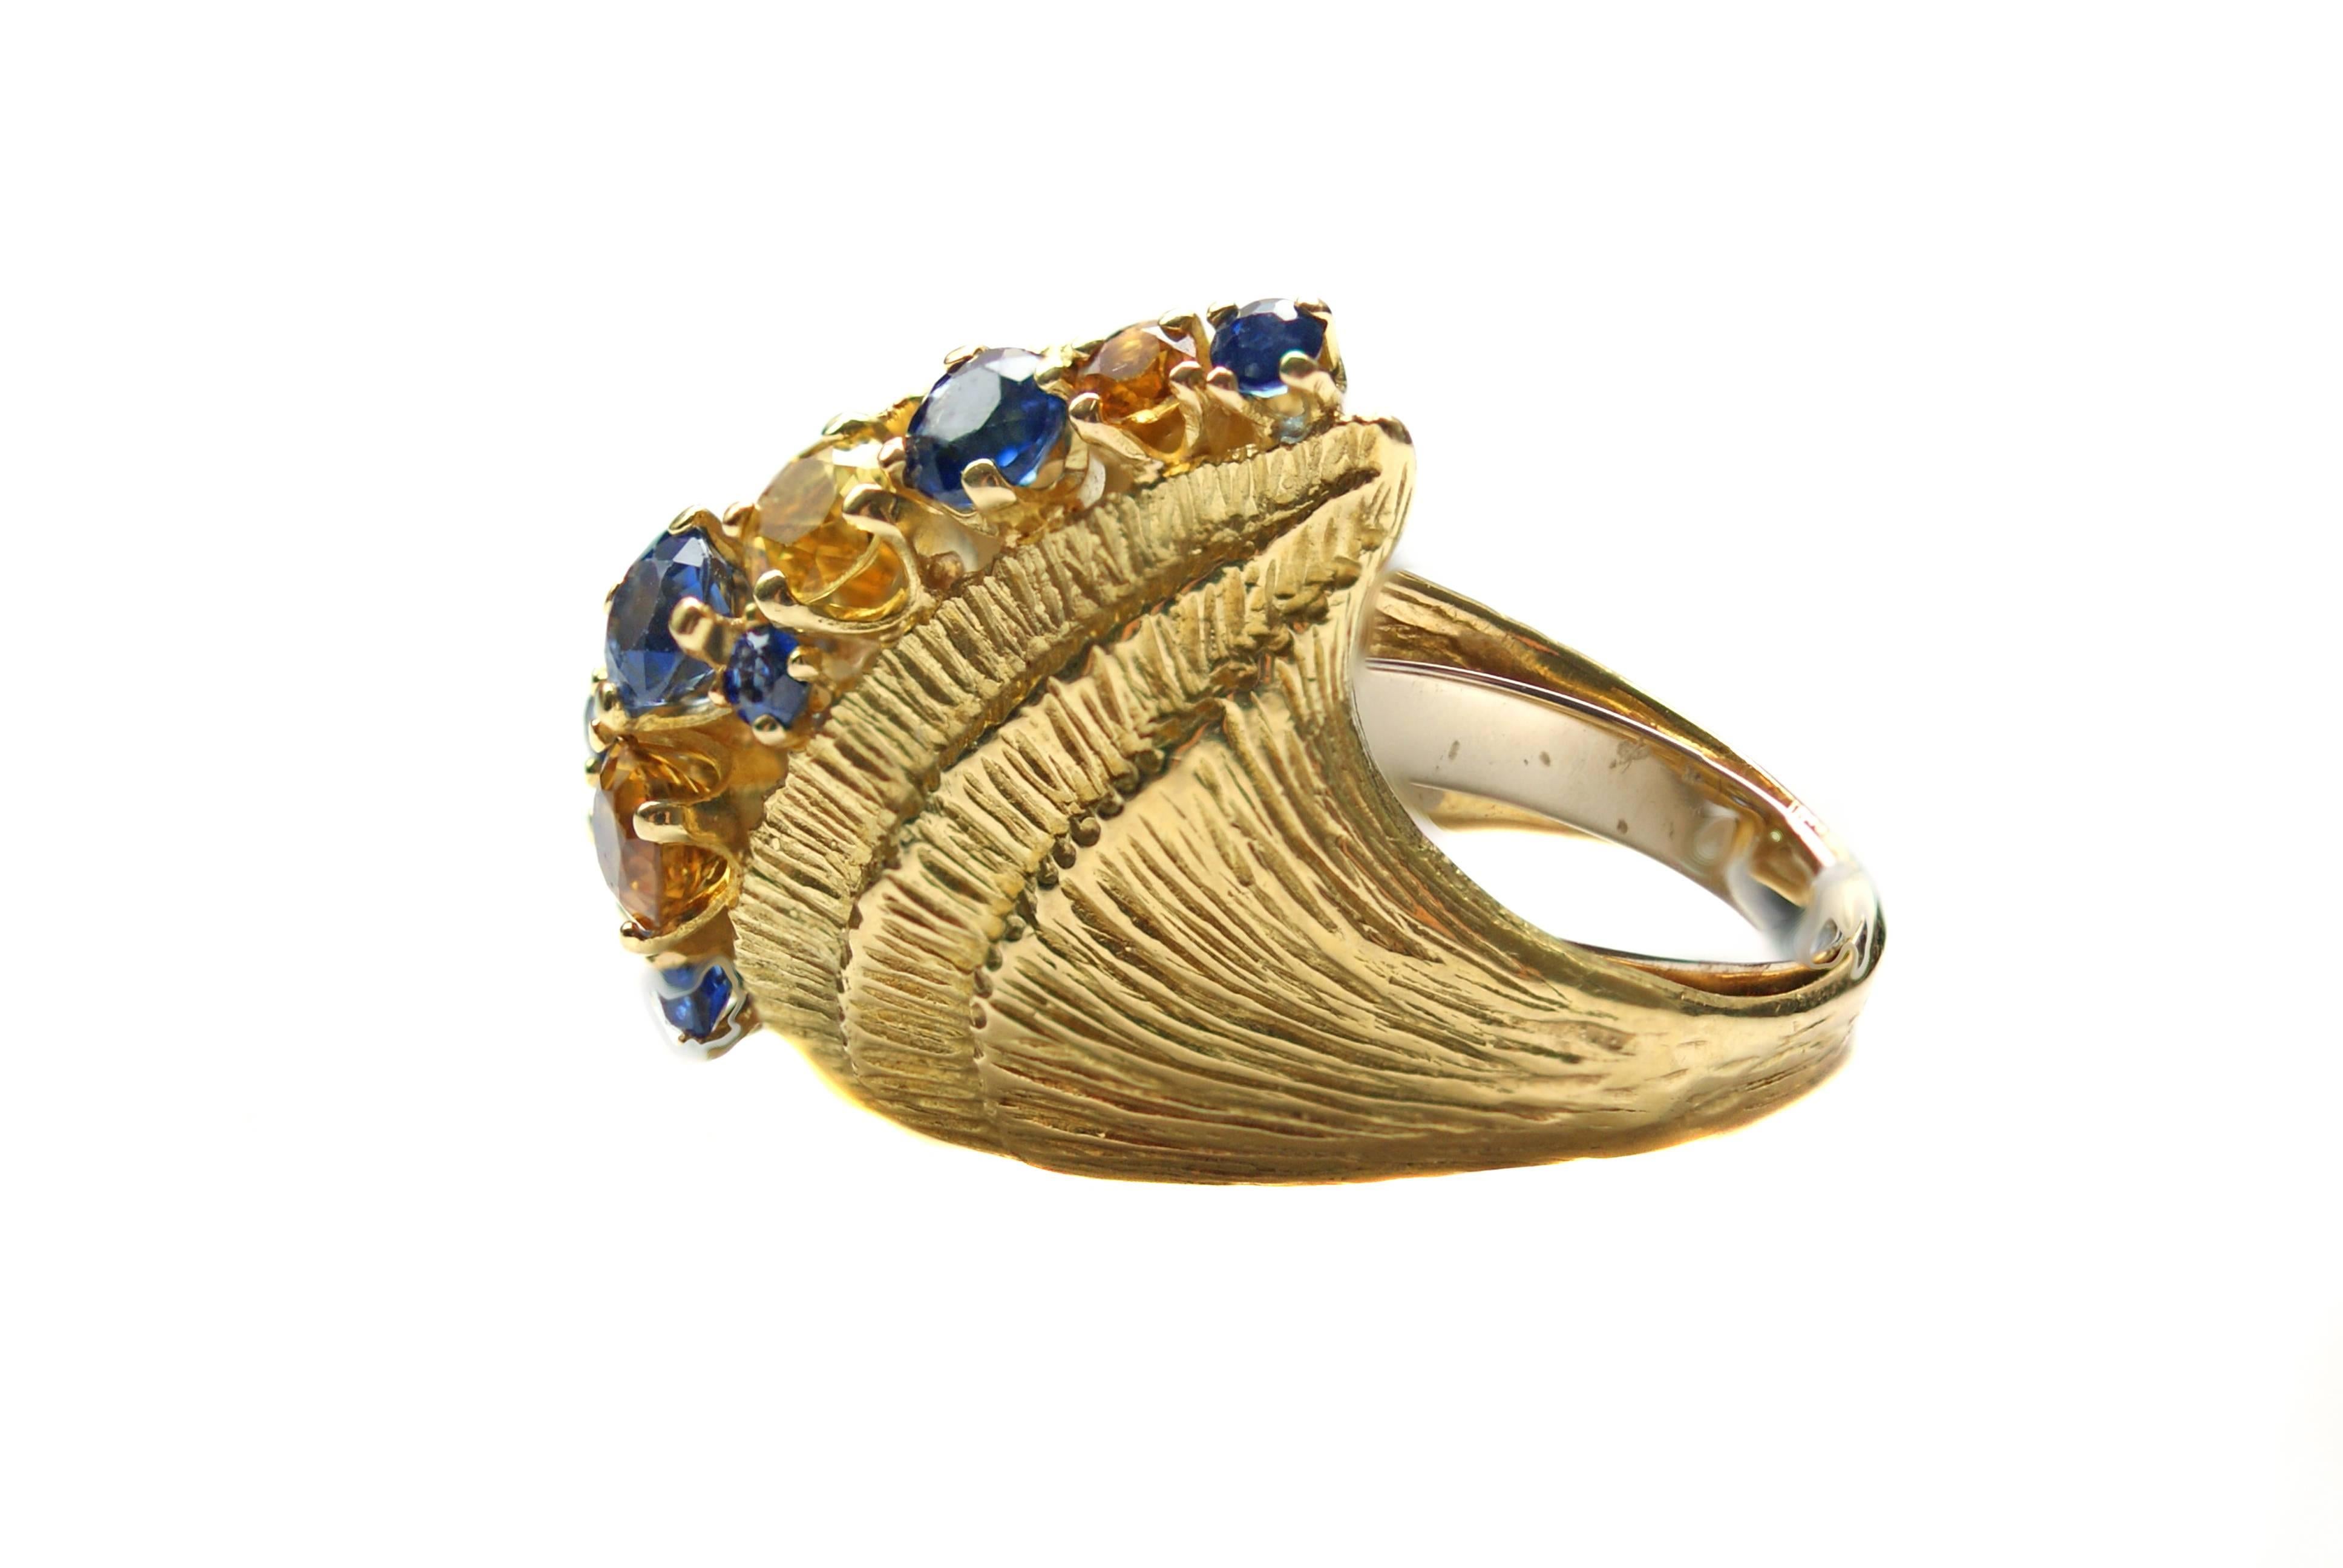 Fashionable and bold 1980s ring centrally set with 4 yellow and golden color round cut sapphires and 8 intense blue color round cut sapphires. The incredibly well hand-crafted 18 karat yellow gold ring features 4 steps of finely hand engraved